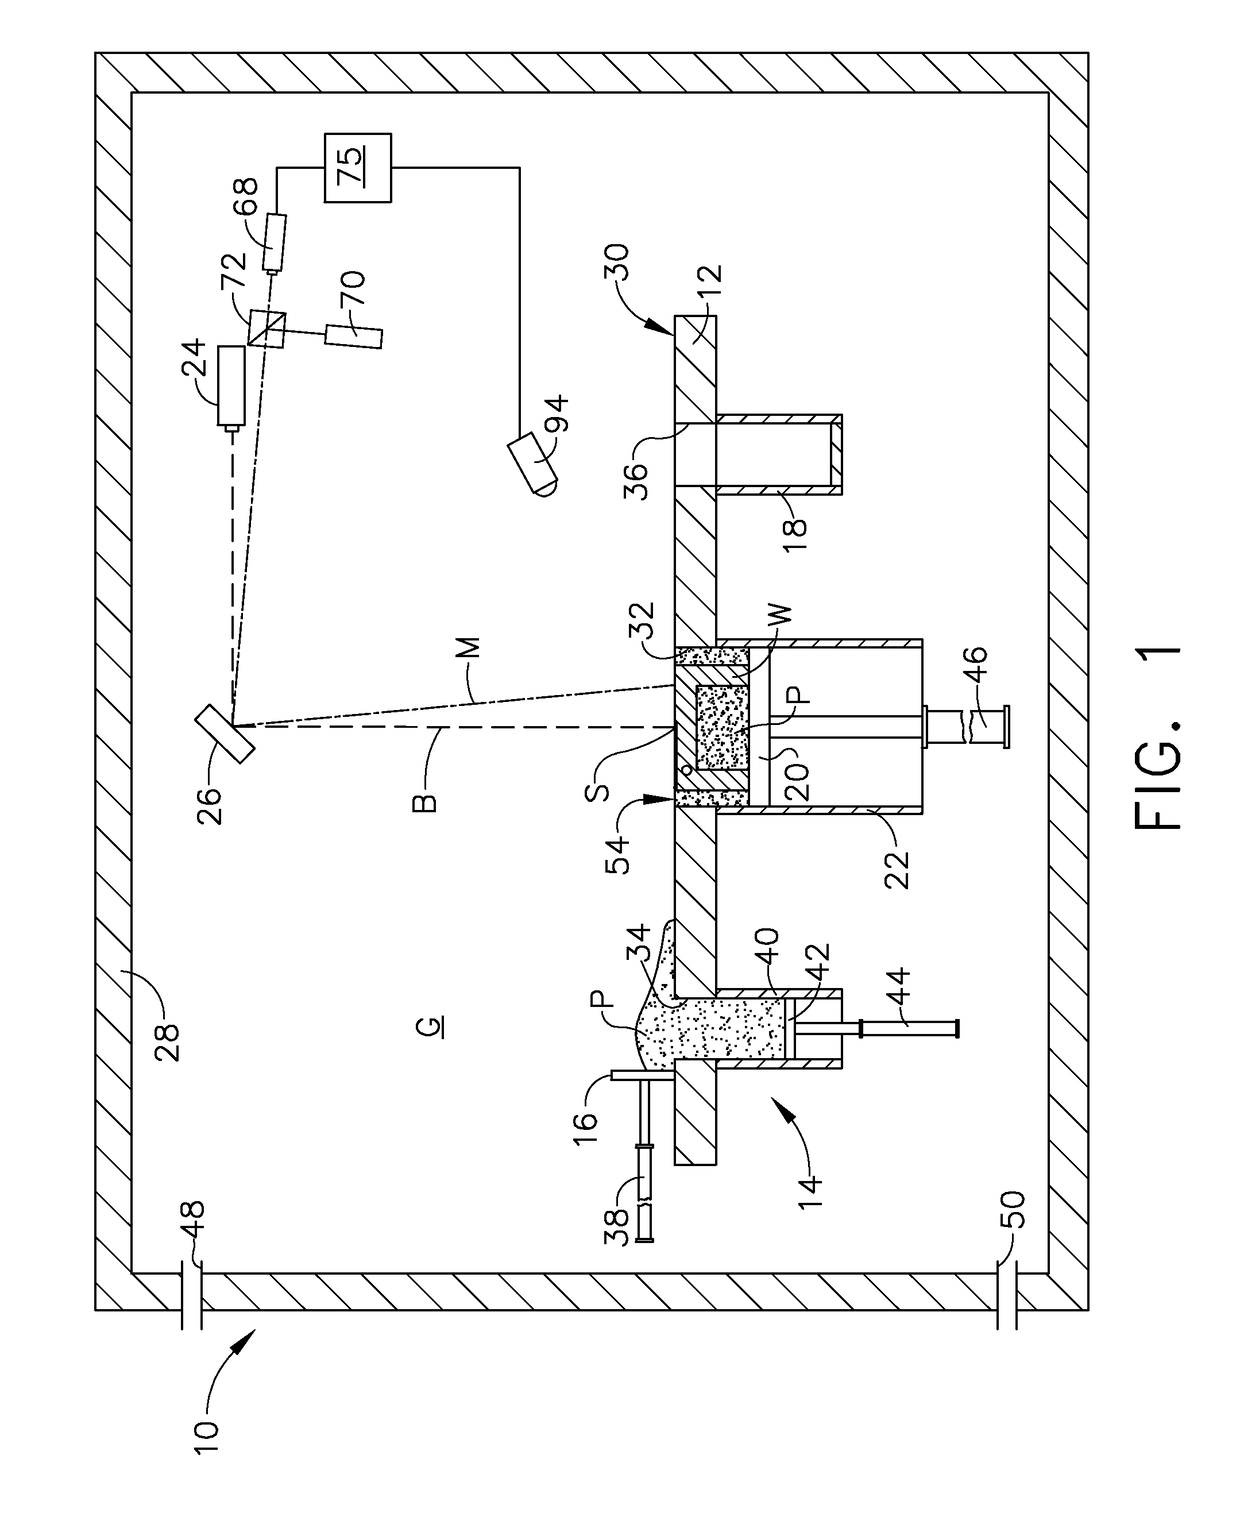 Non-contact acoustic inspection method for additive manufacturing processes